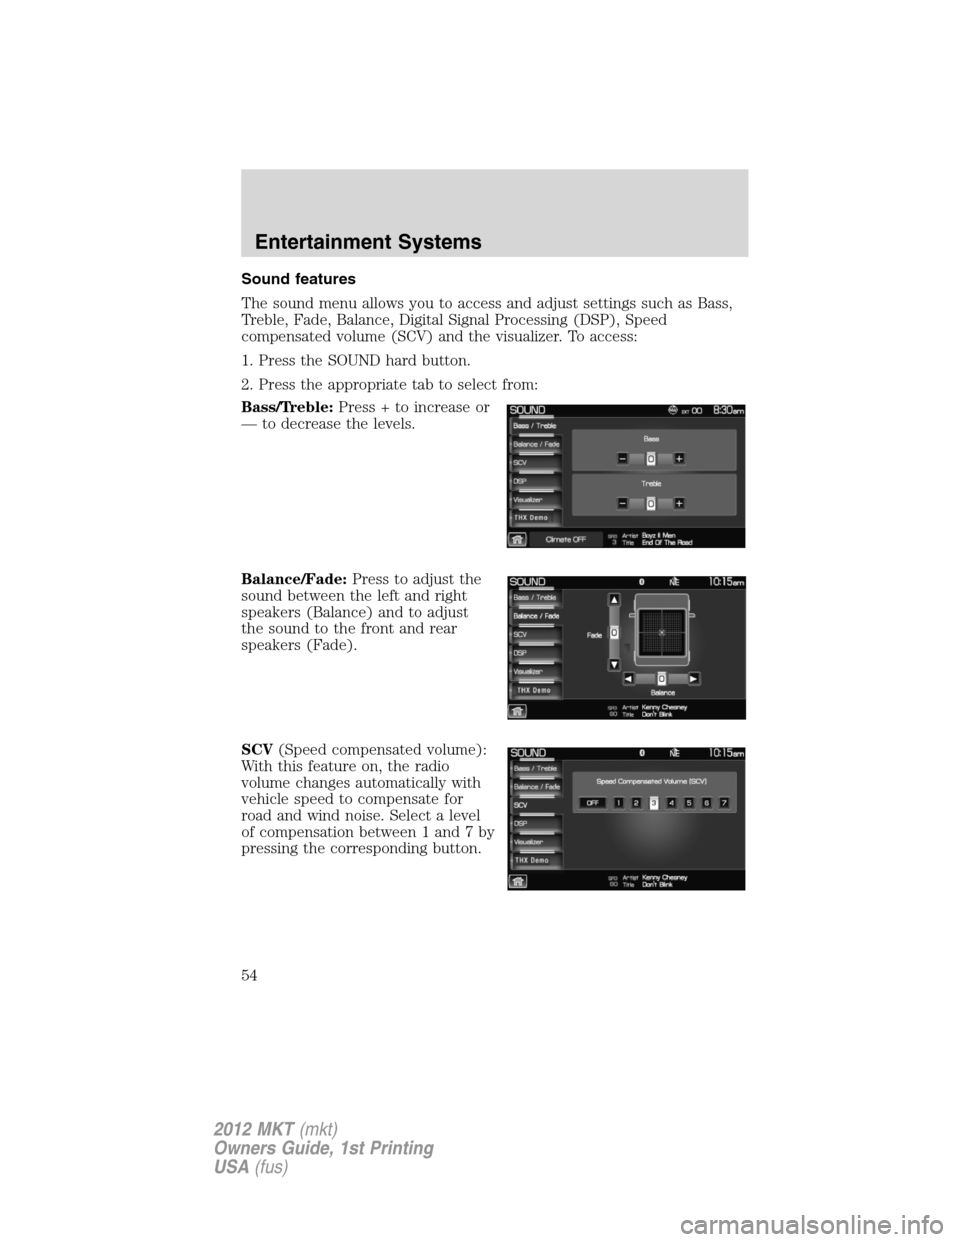 LINCOLN MKT 2012 Workshop Manual Sound features
The sound menu allows you to access and adjust settings such as Bass,
Treble, Fade, Balance, Digital Signal Processing (DSP), Speed
compensated volume (SCV) and the visualizer. To acces